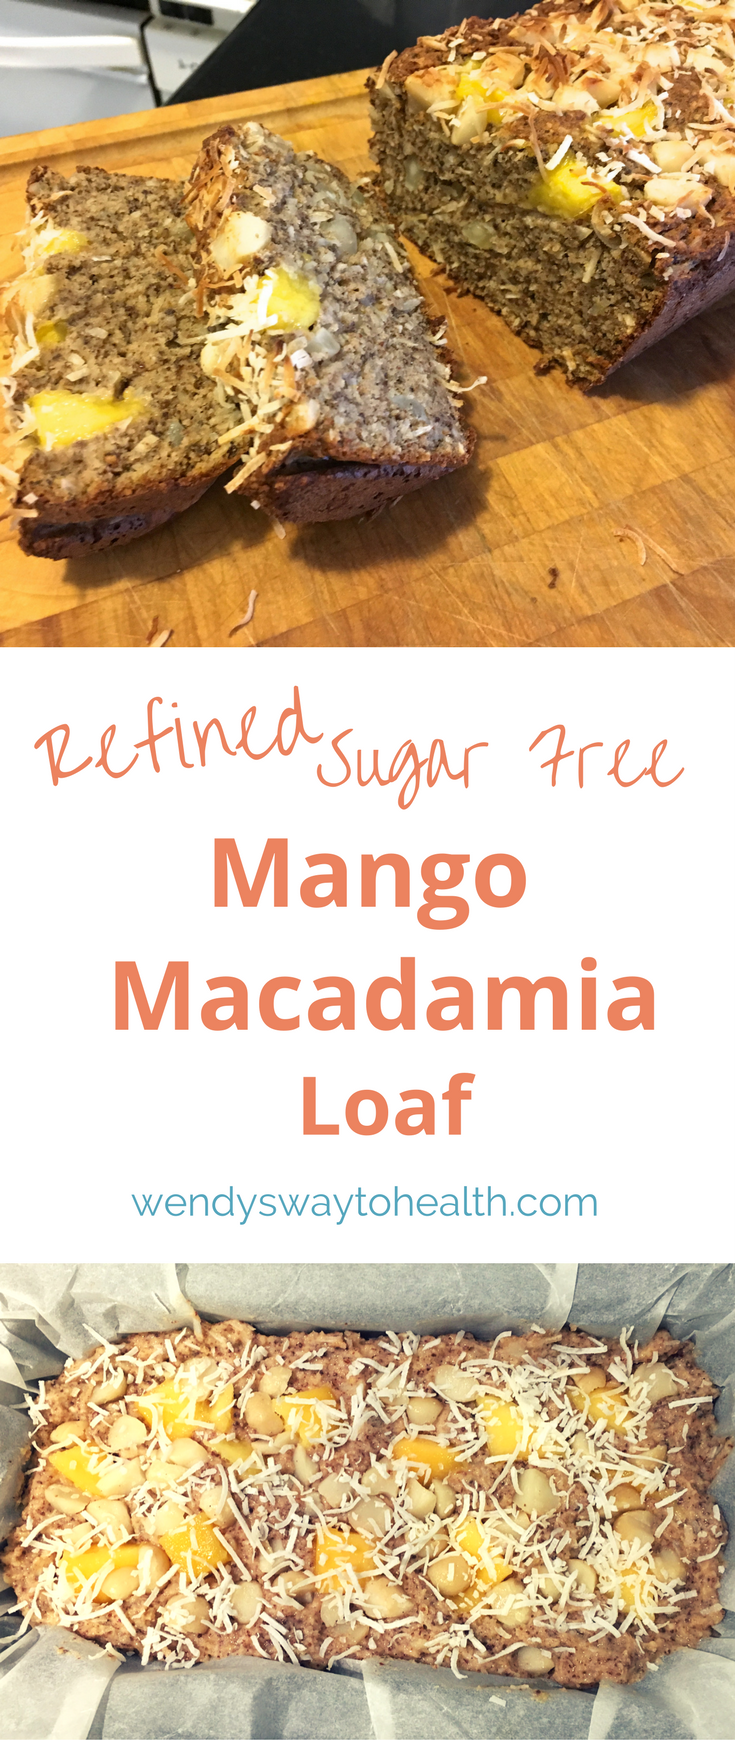 This mango macadamia loaf is perfect for breakfast or a healthy snack any time of day